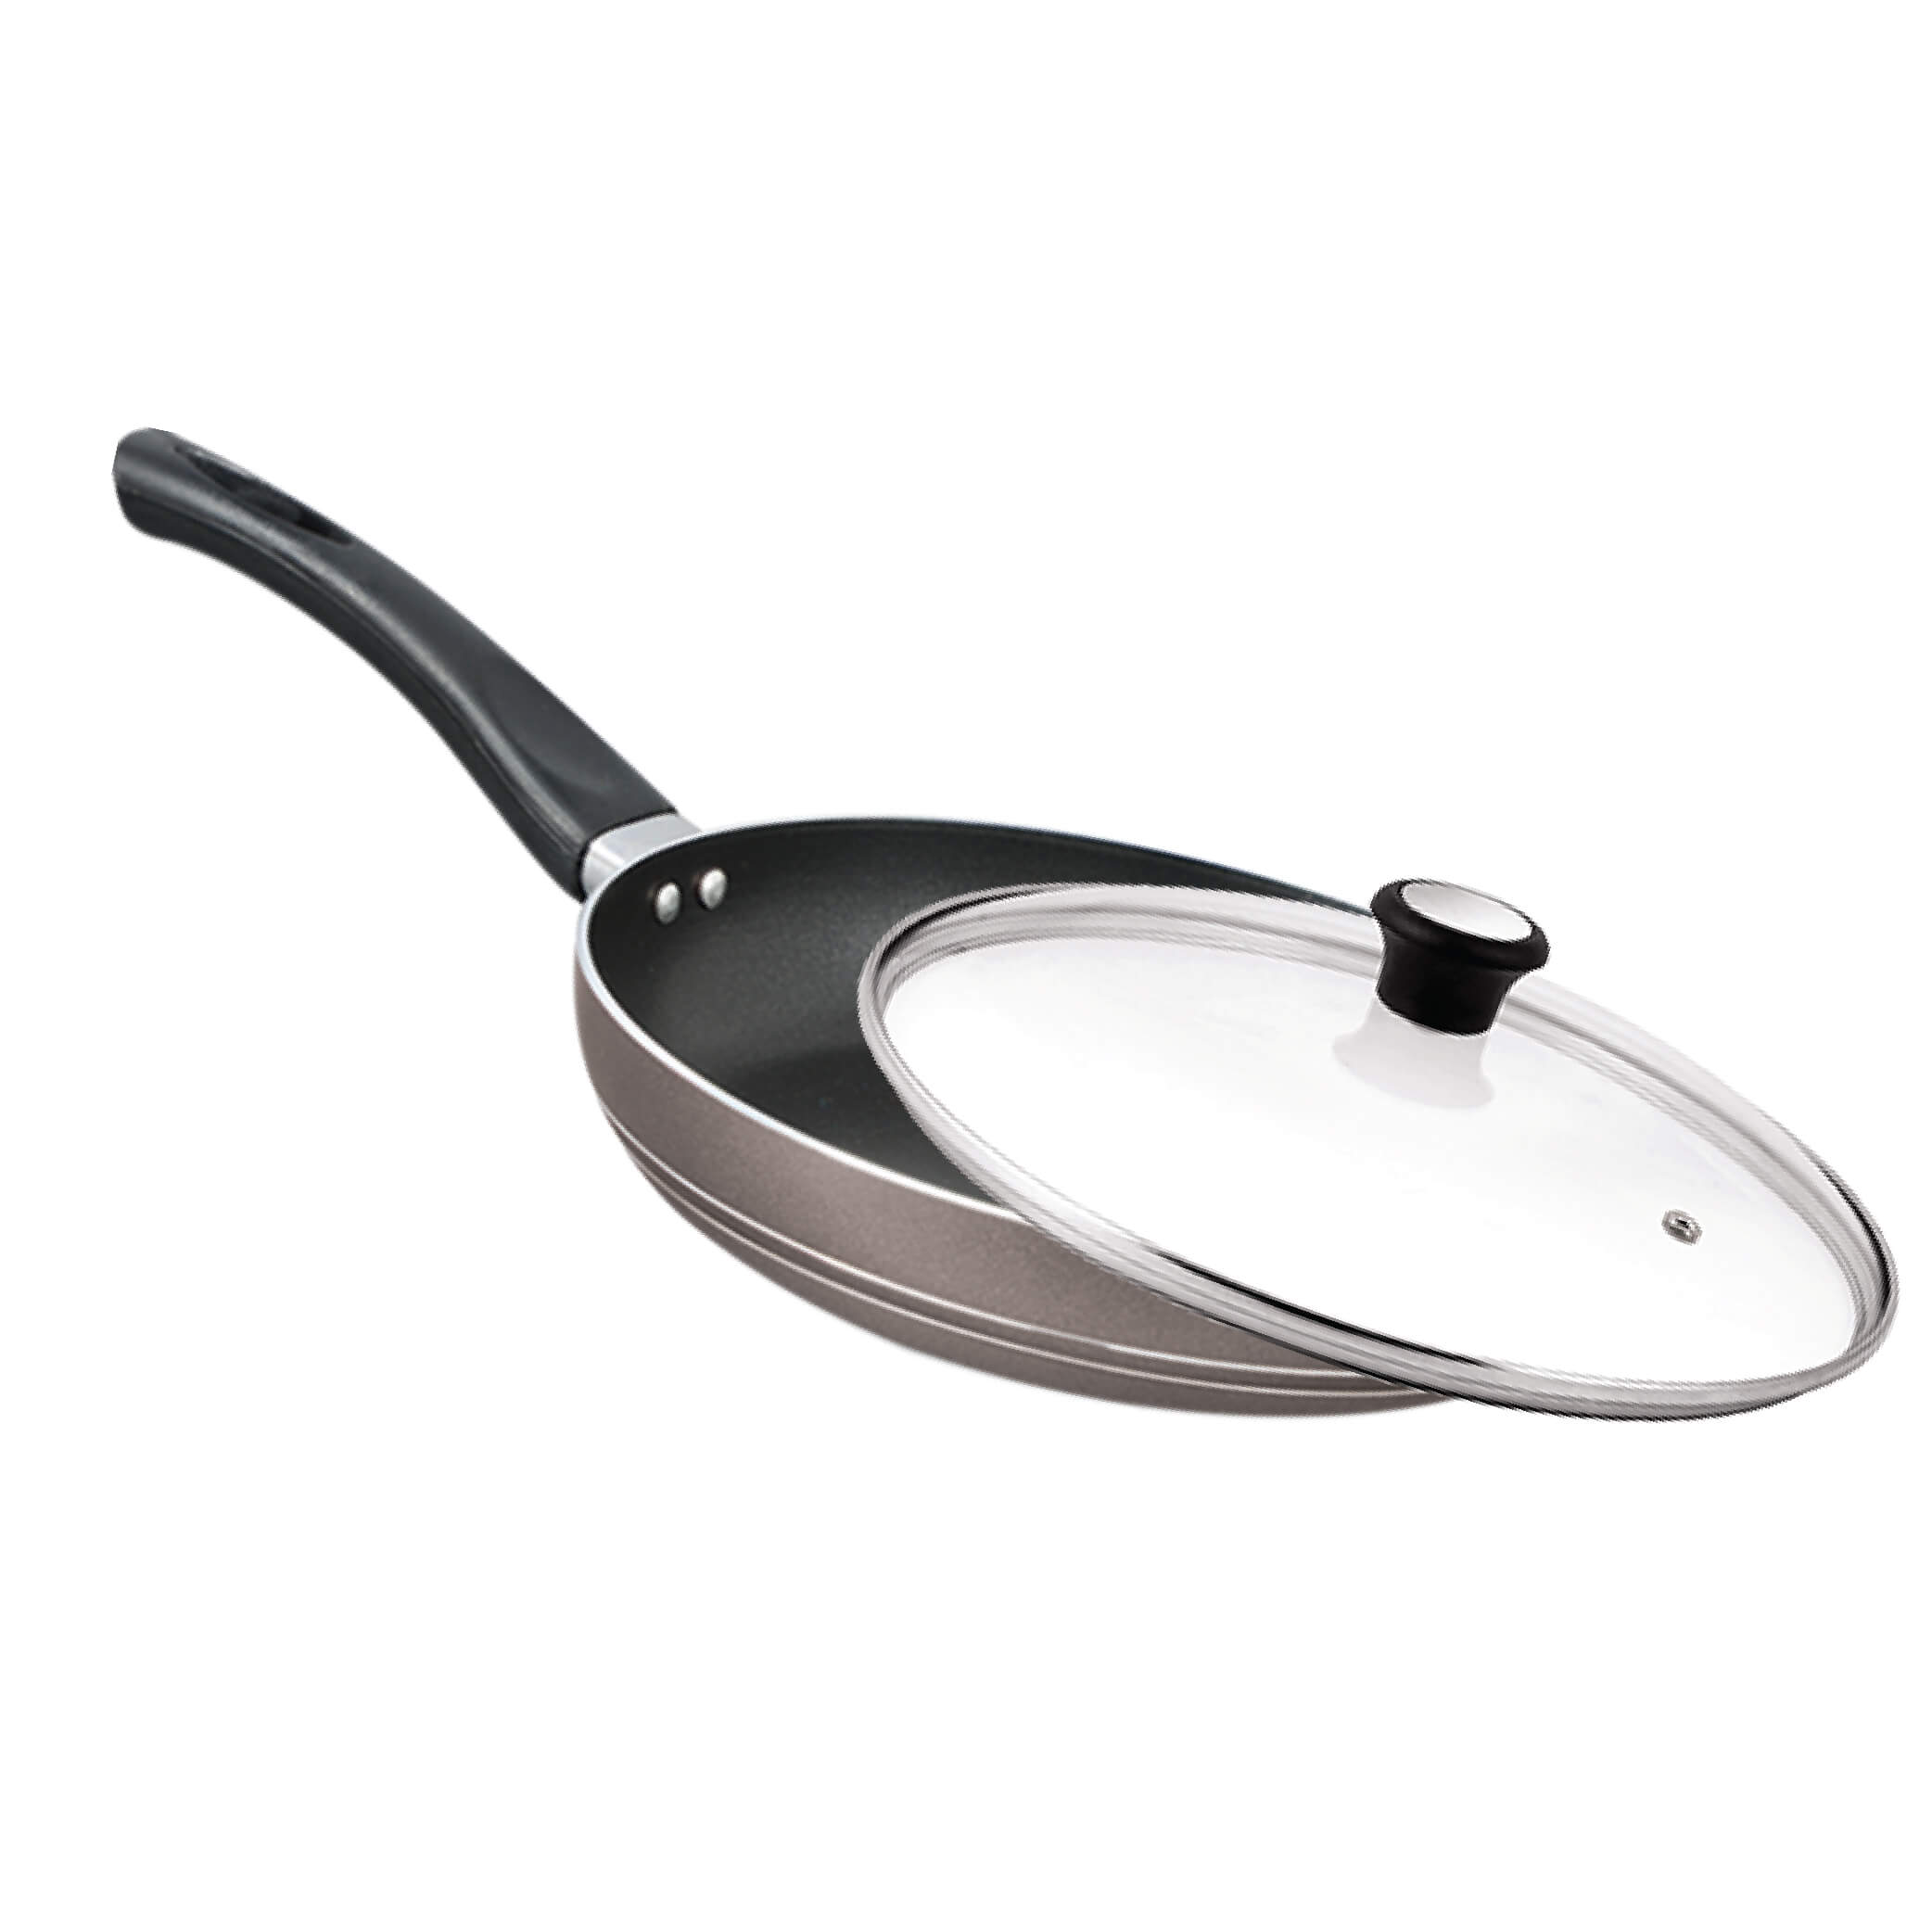 Chef best non stick round frying pan with glass lid - majestic chef